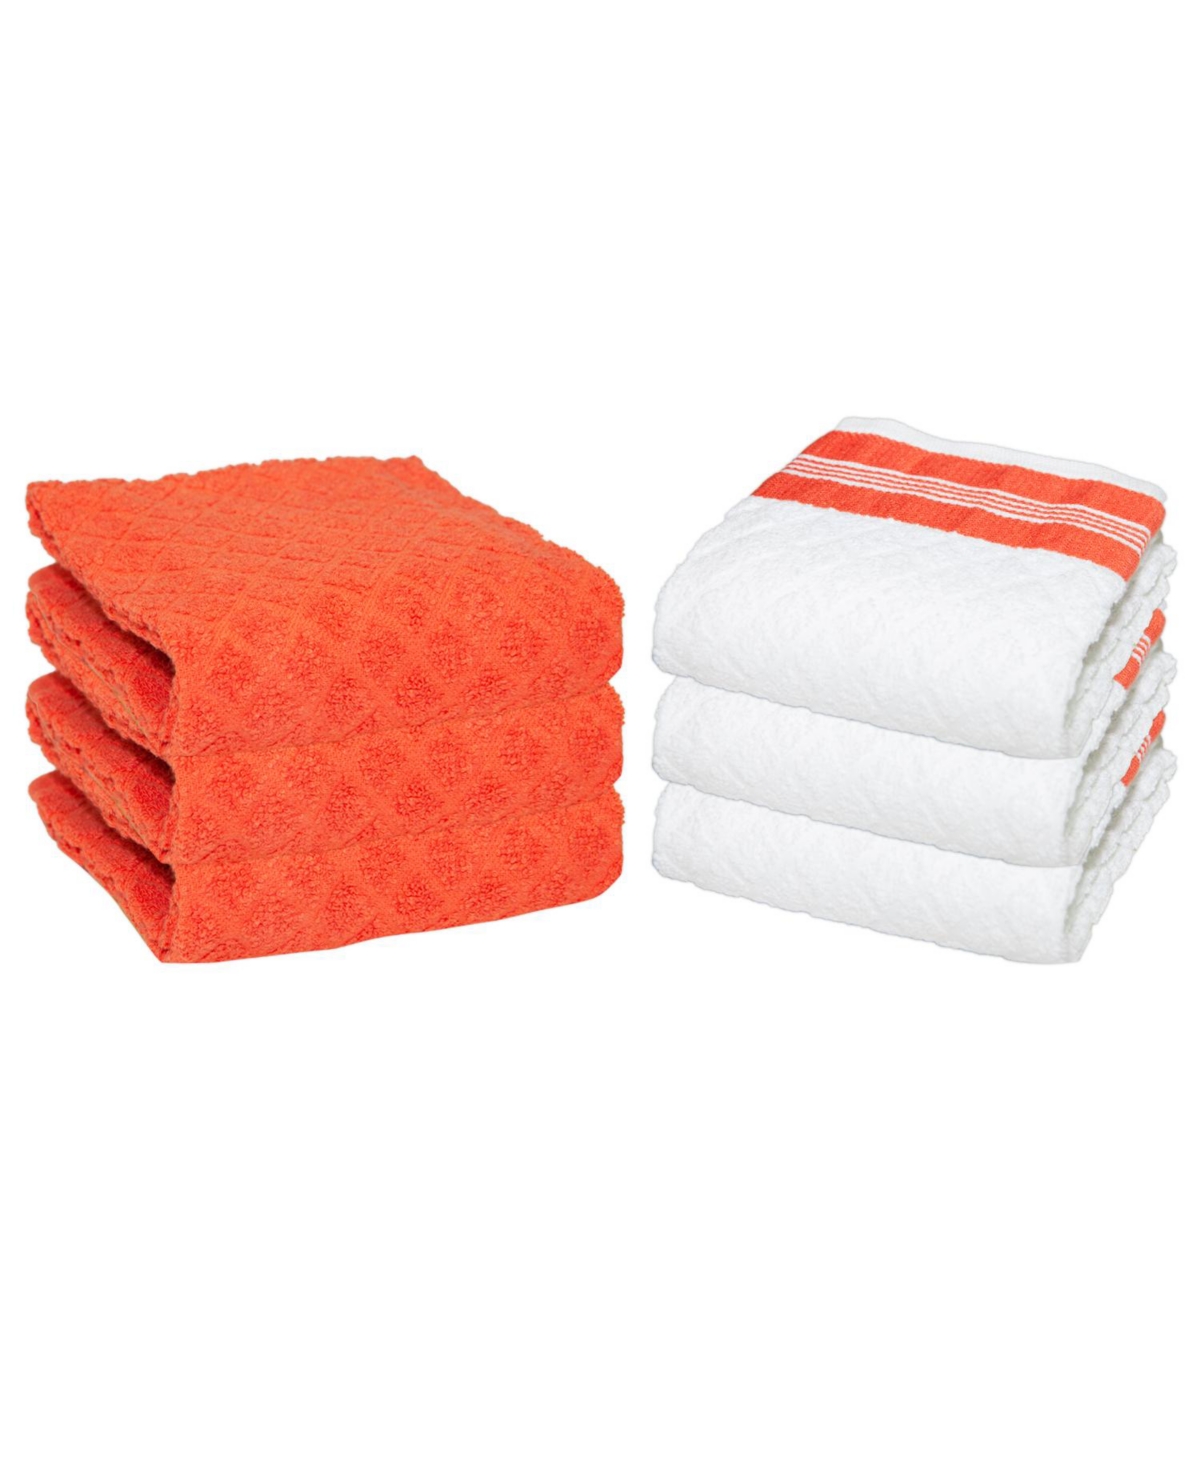 Premier Kitchen Towels (Set of 6), 3 Solid Color Towels and 3 White Towels with Matching Pattern, 15x25 in., Soft Ringspun Cotton, Diamond